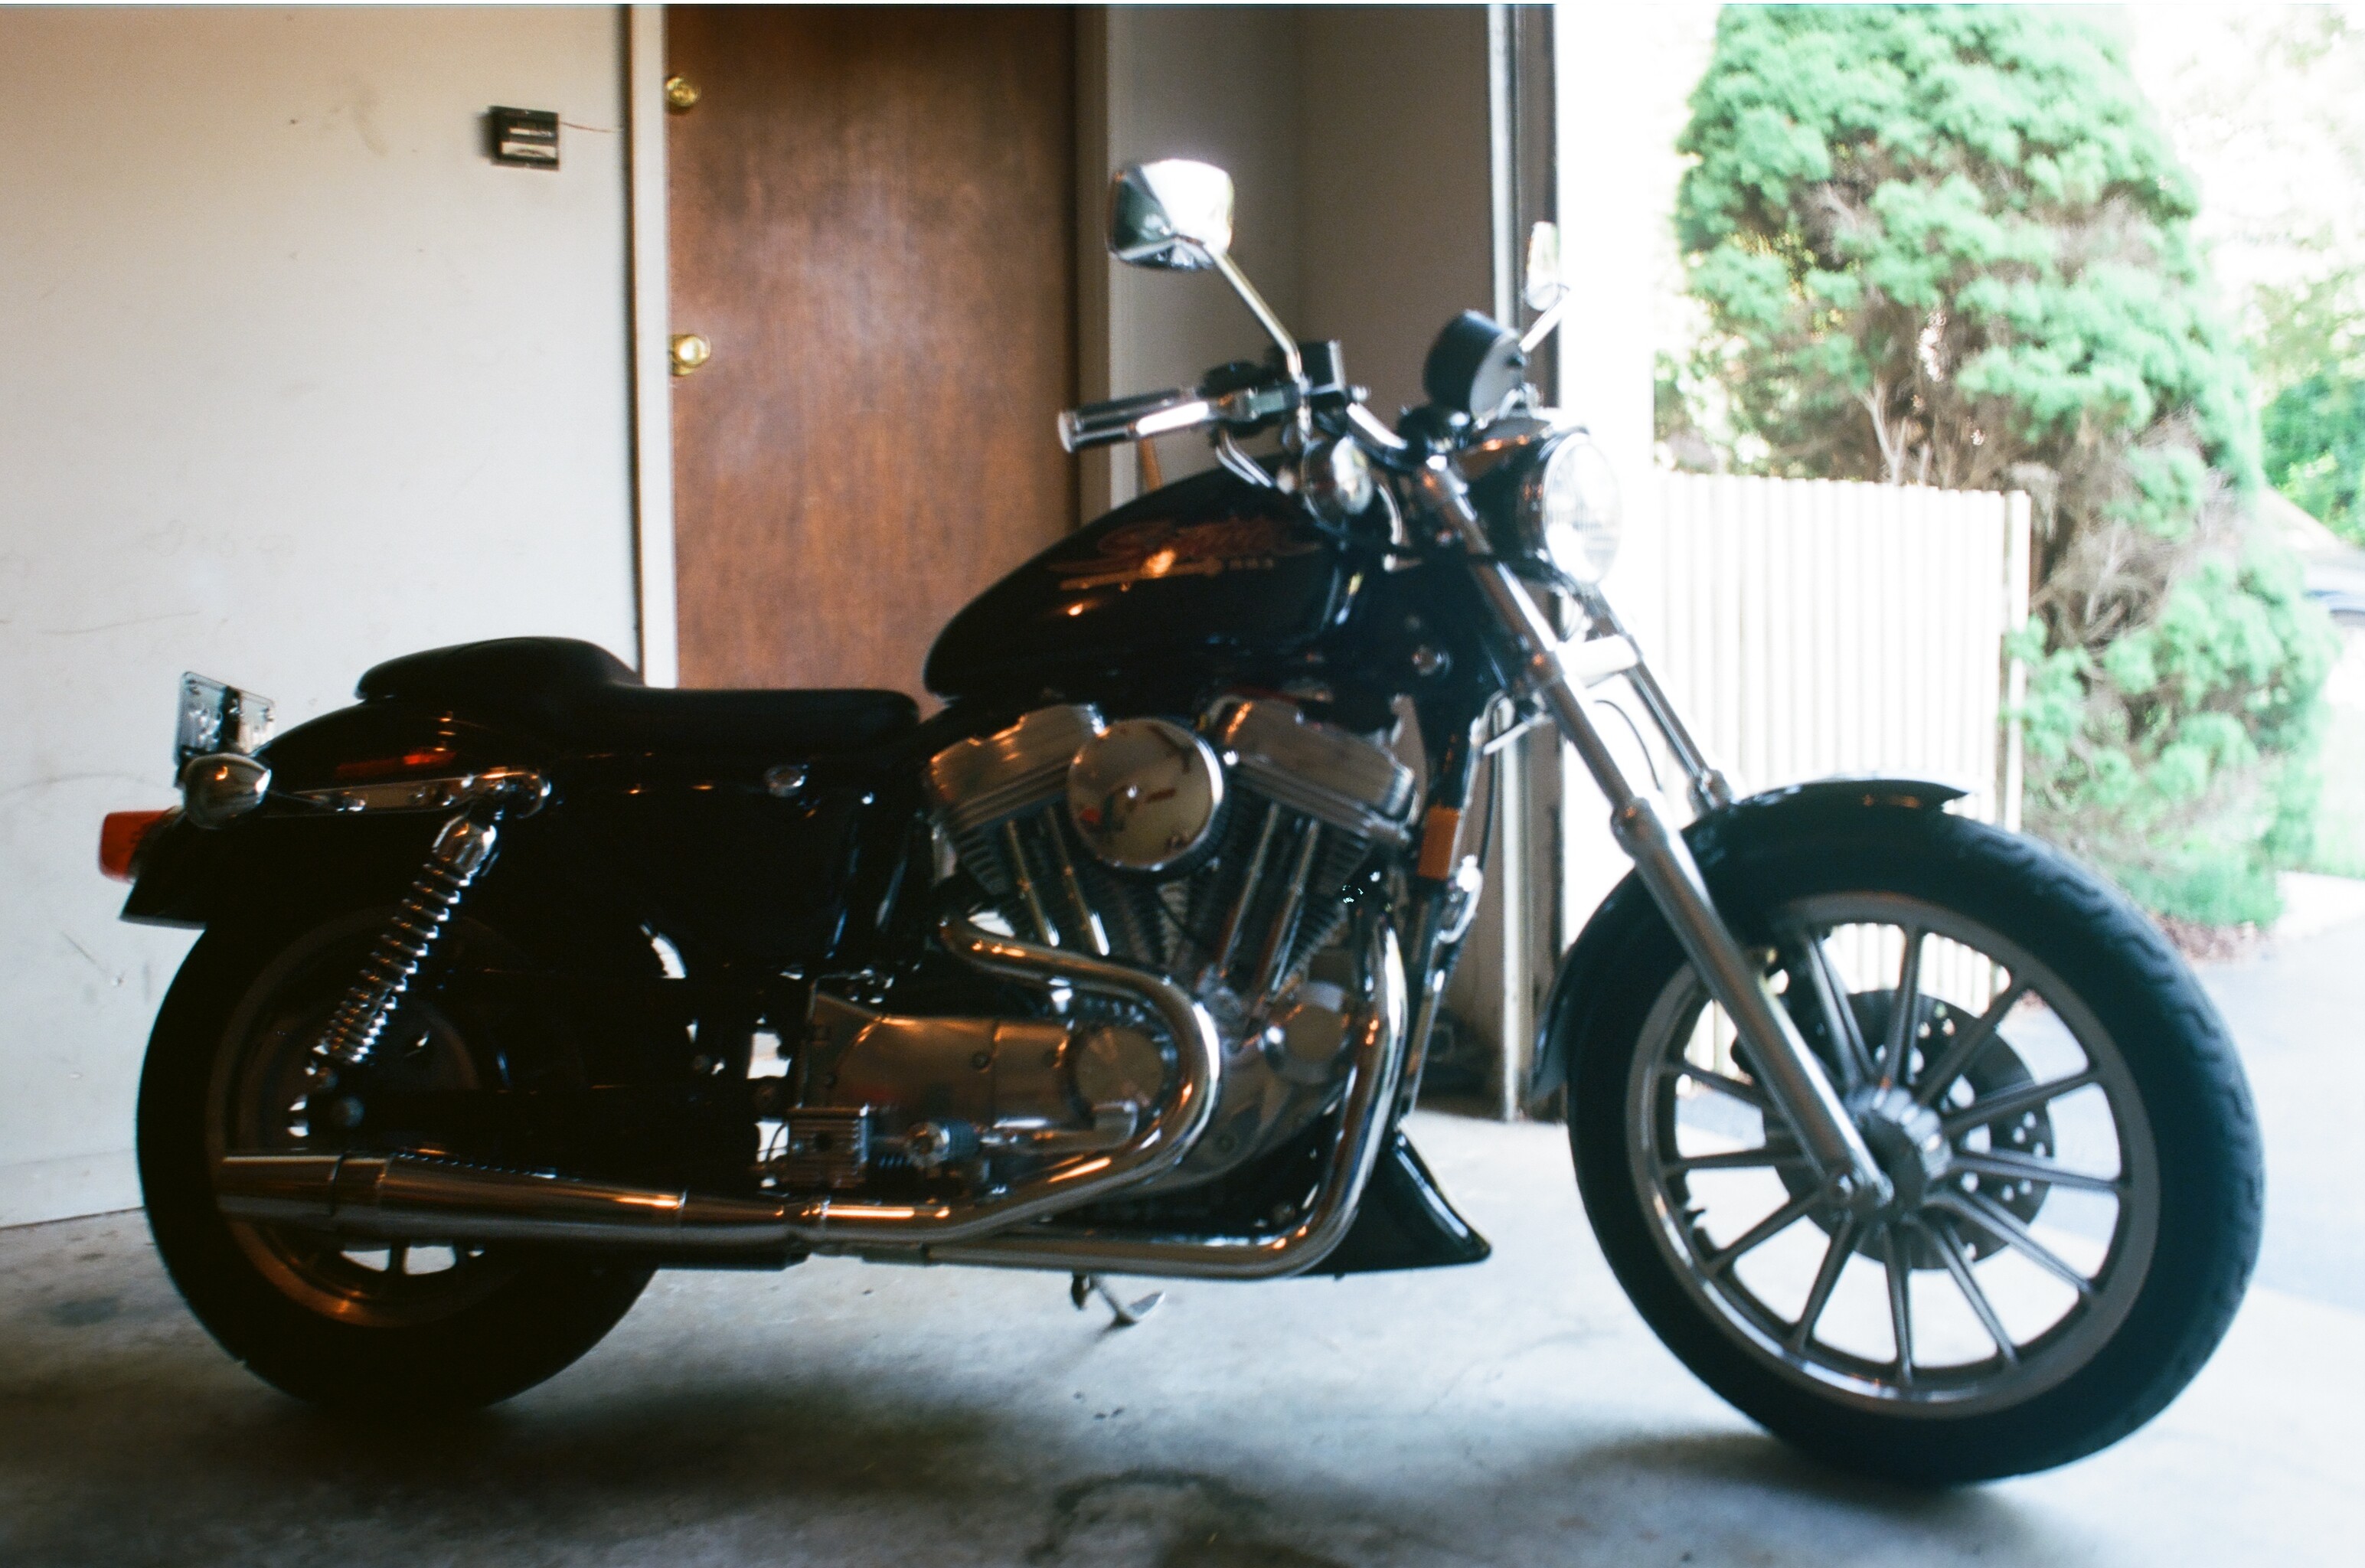 Best 2 into 1 exhaust for Sportster 72? - Harley Davidson Forums